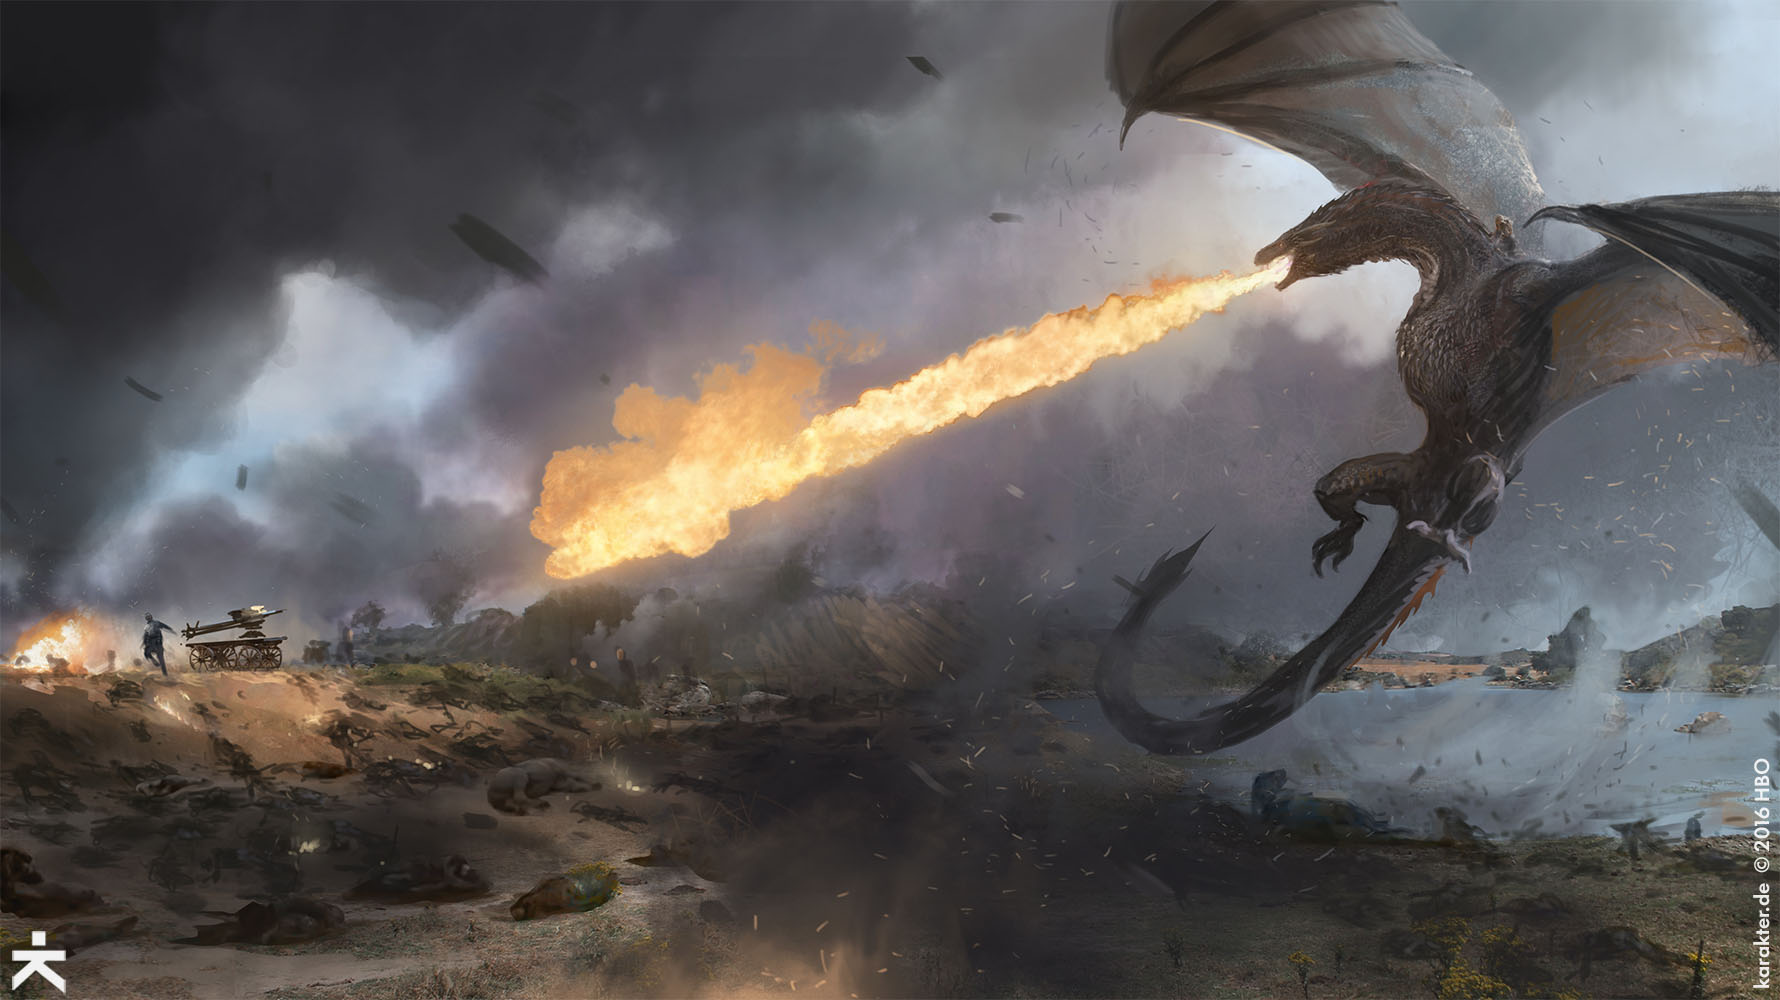 Battle Of Dragons Game Of Thrones 8 Art Wallpapers